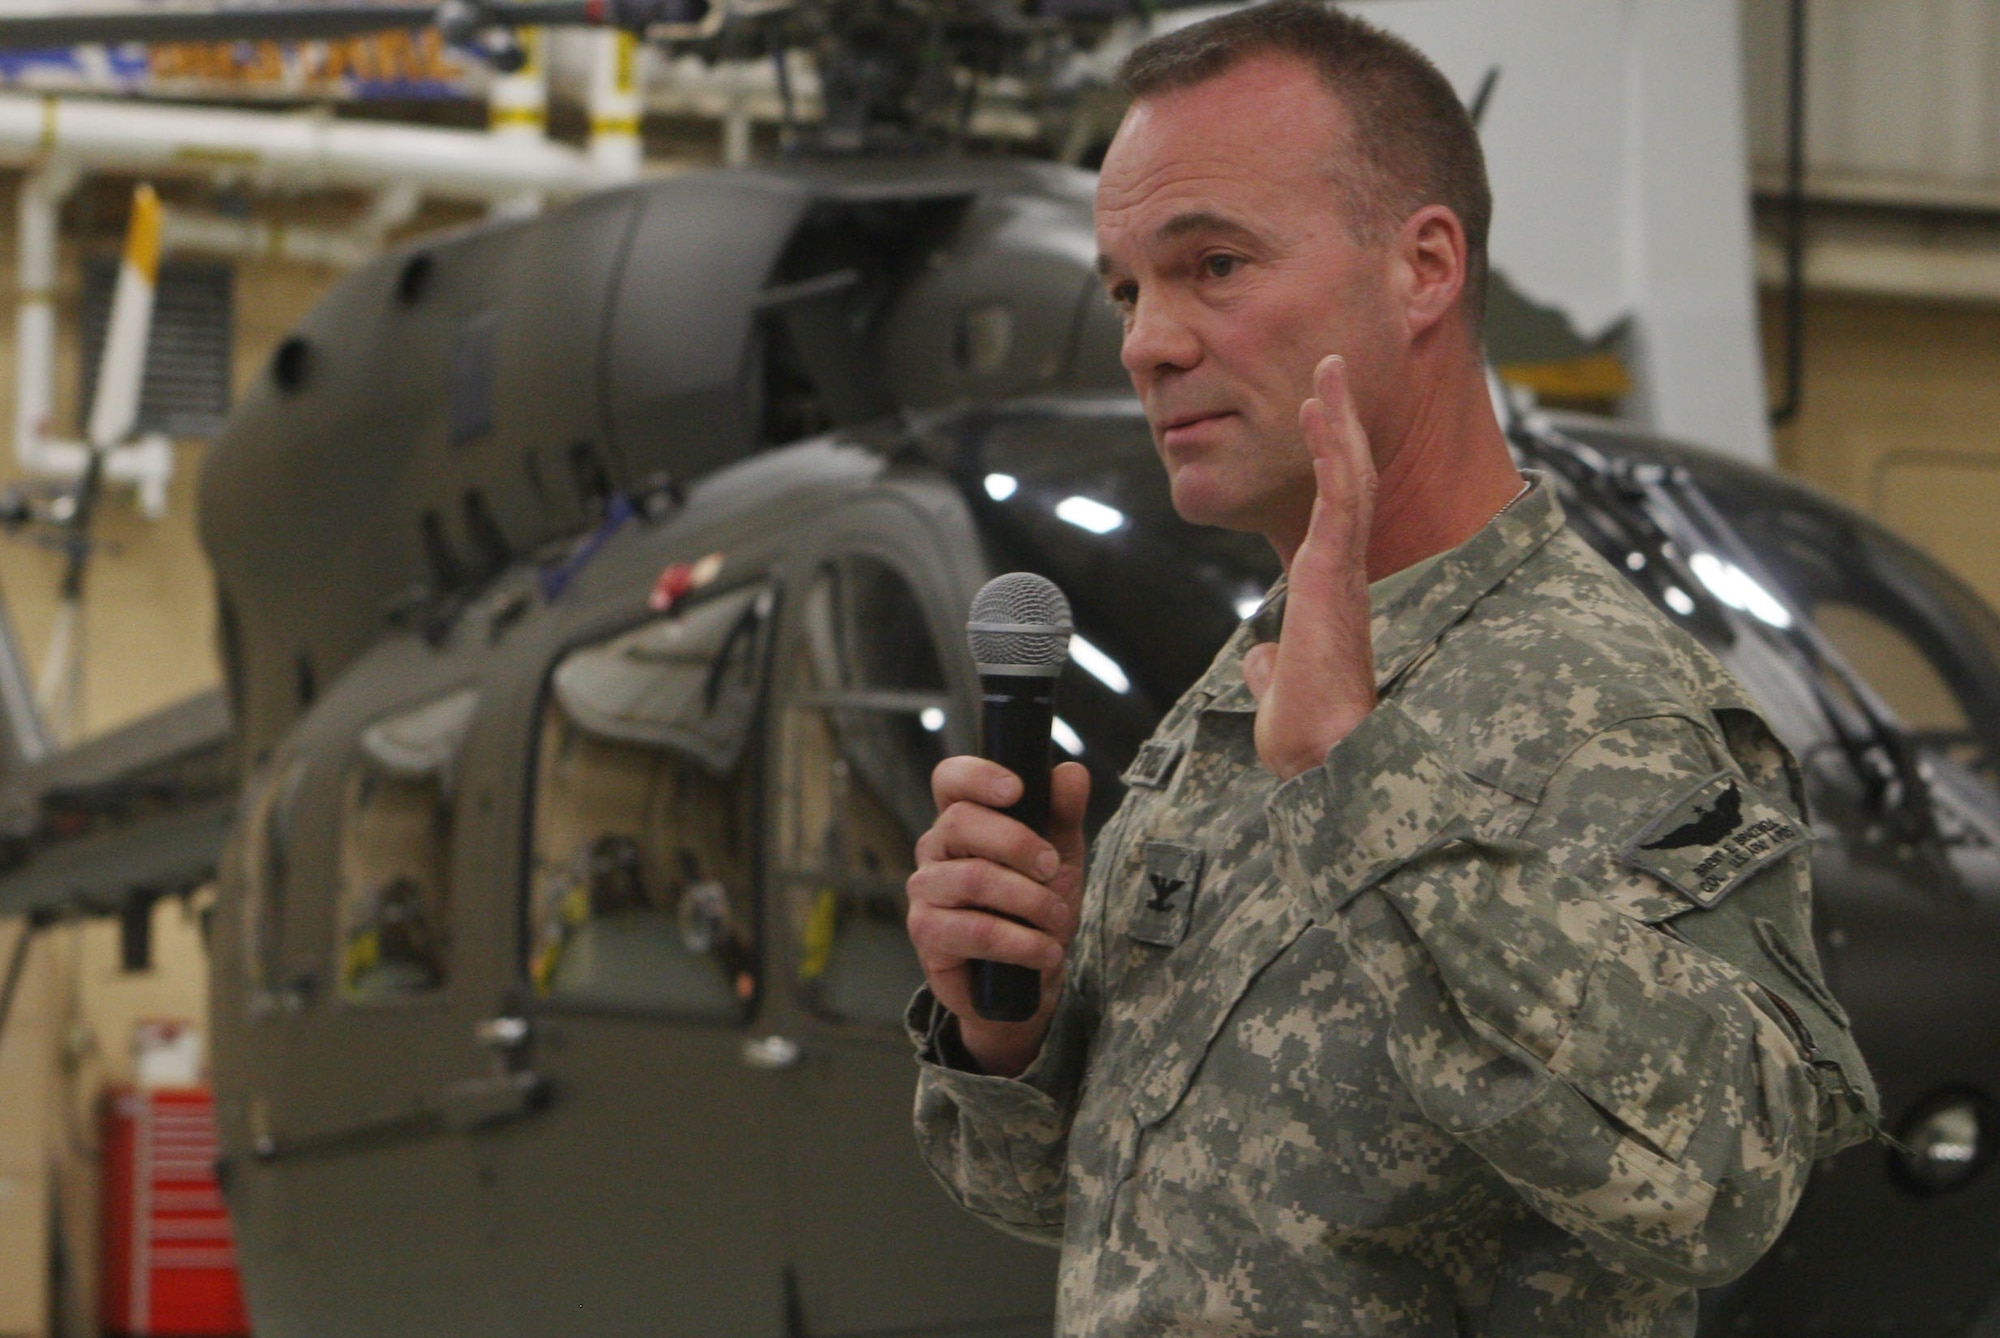 Col. Brent Bracewell, Commander of the 78th Aviation Troop Command, Georgia Army National Guard speaks to a crowd of military and civilian personnel during a UH-72A Lakota Helicopter Delivery Ceremony Dec 3. (U.S. Air Force Photo/Don Peek)